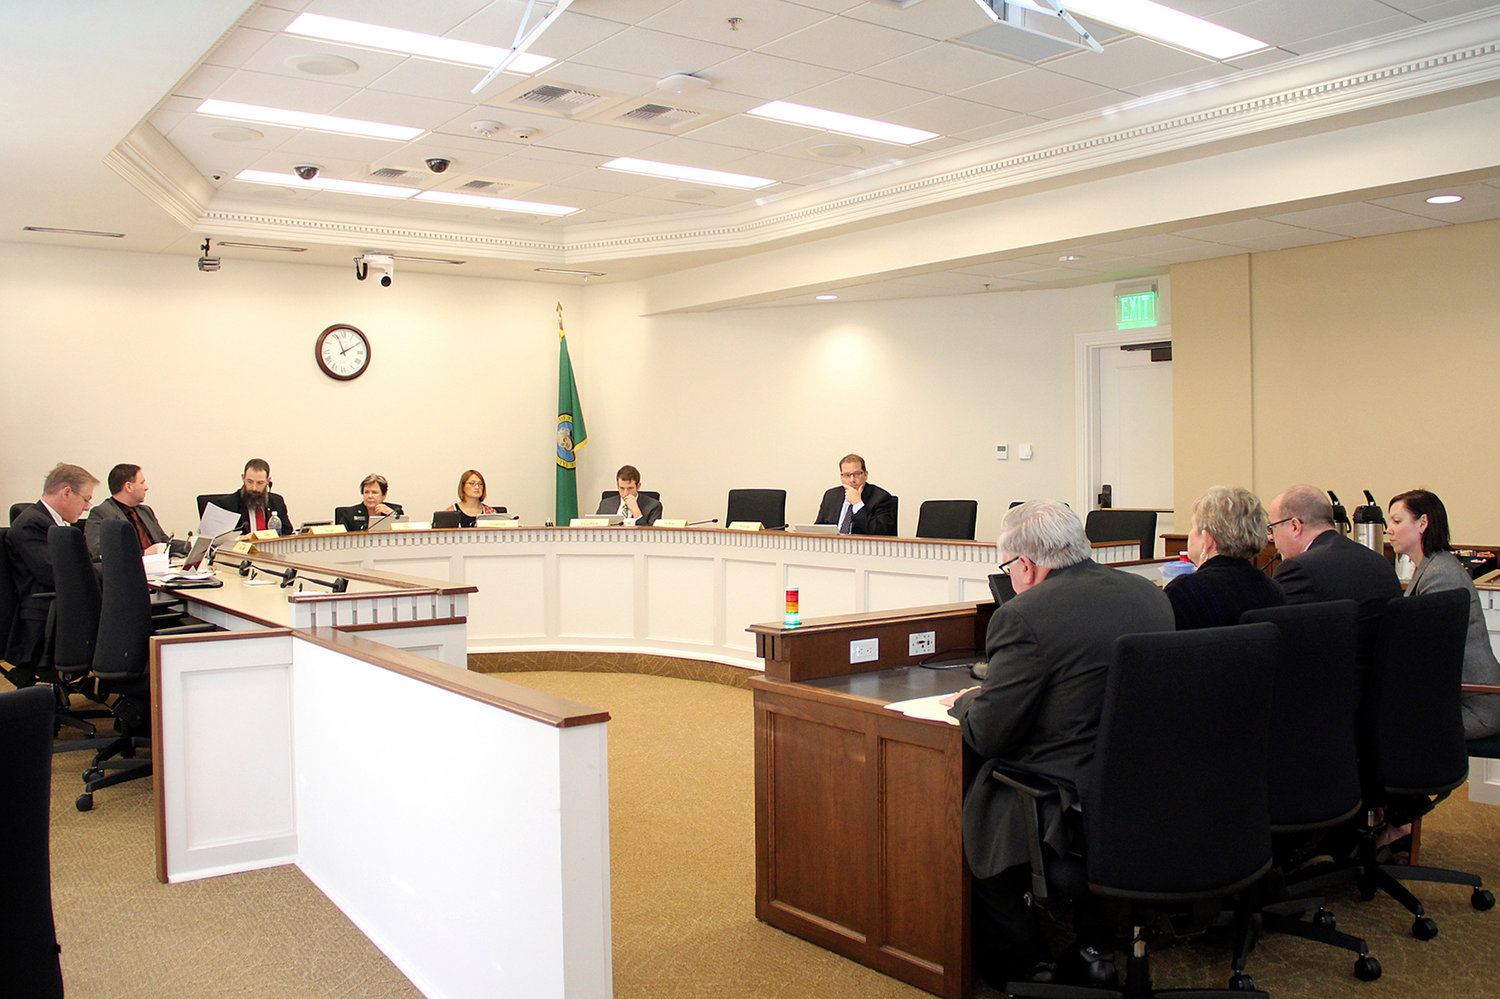 About 30 people testified on House Bill 2576, which aimed to make changes to the public records act, in Olympia in January 2016. The bill failed to pass, but a new effort has emerged in the current session. 